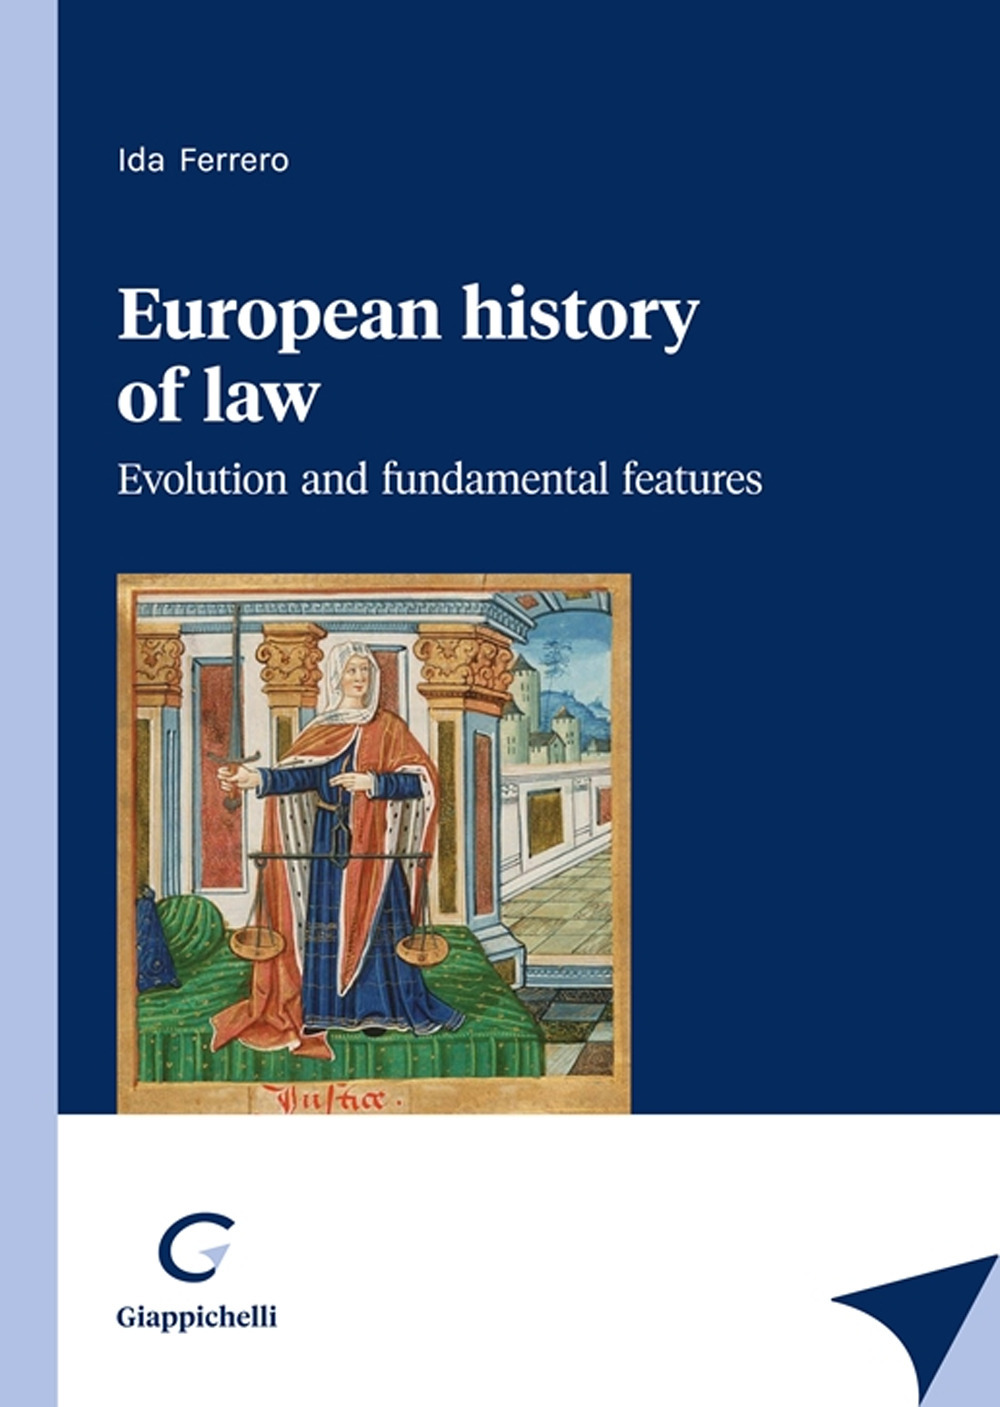 European history of law. Evolution and fundamental features